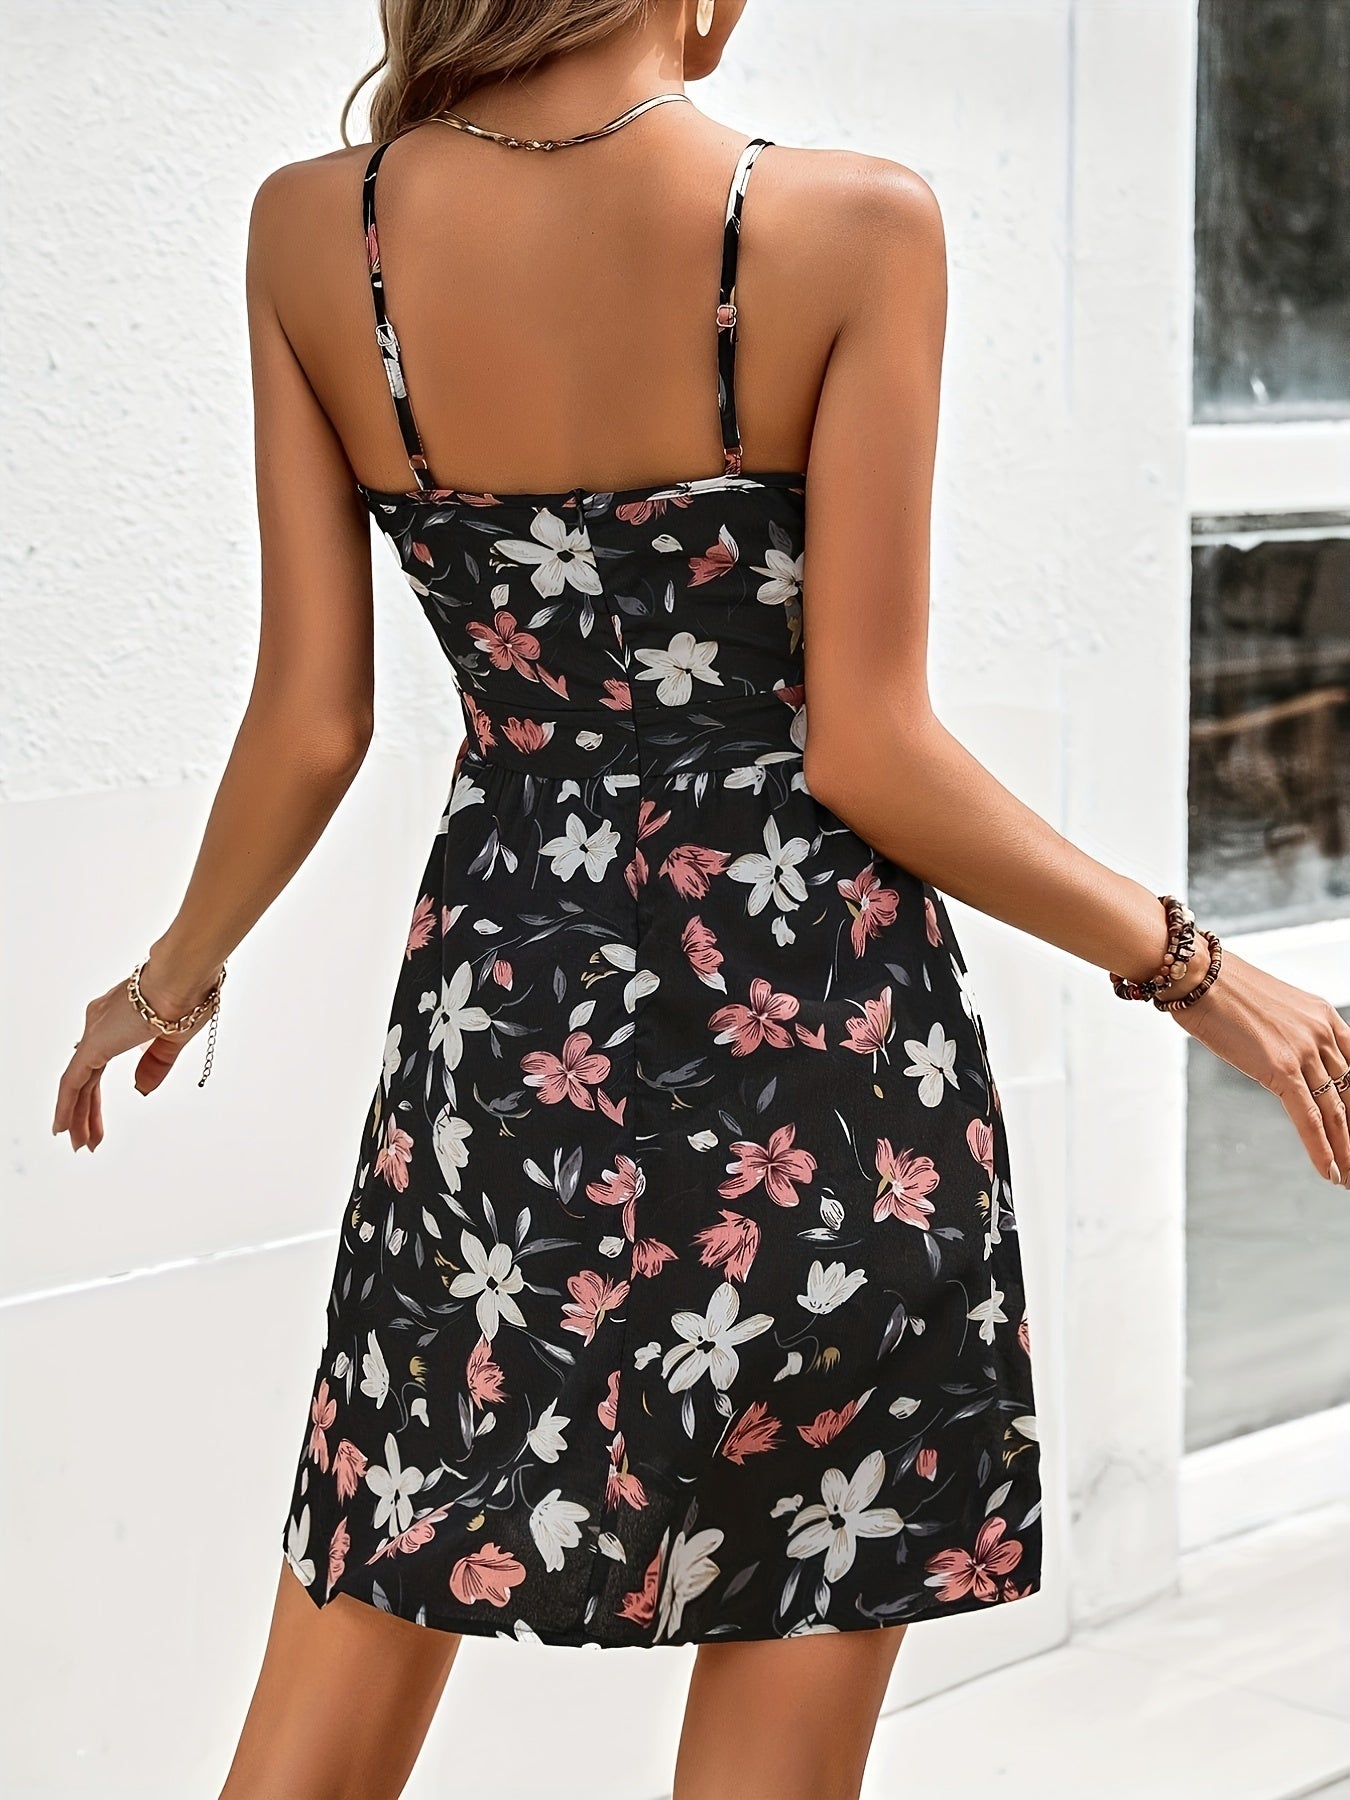 「binfenxie」Floral Print Spaghetti Dress, Romantic Plunging V-neck Backless Cami Dress, Women's Clothing